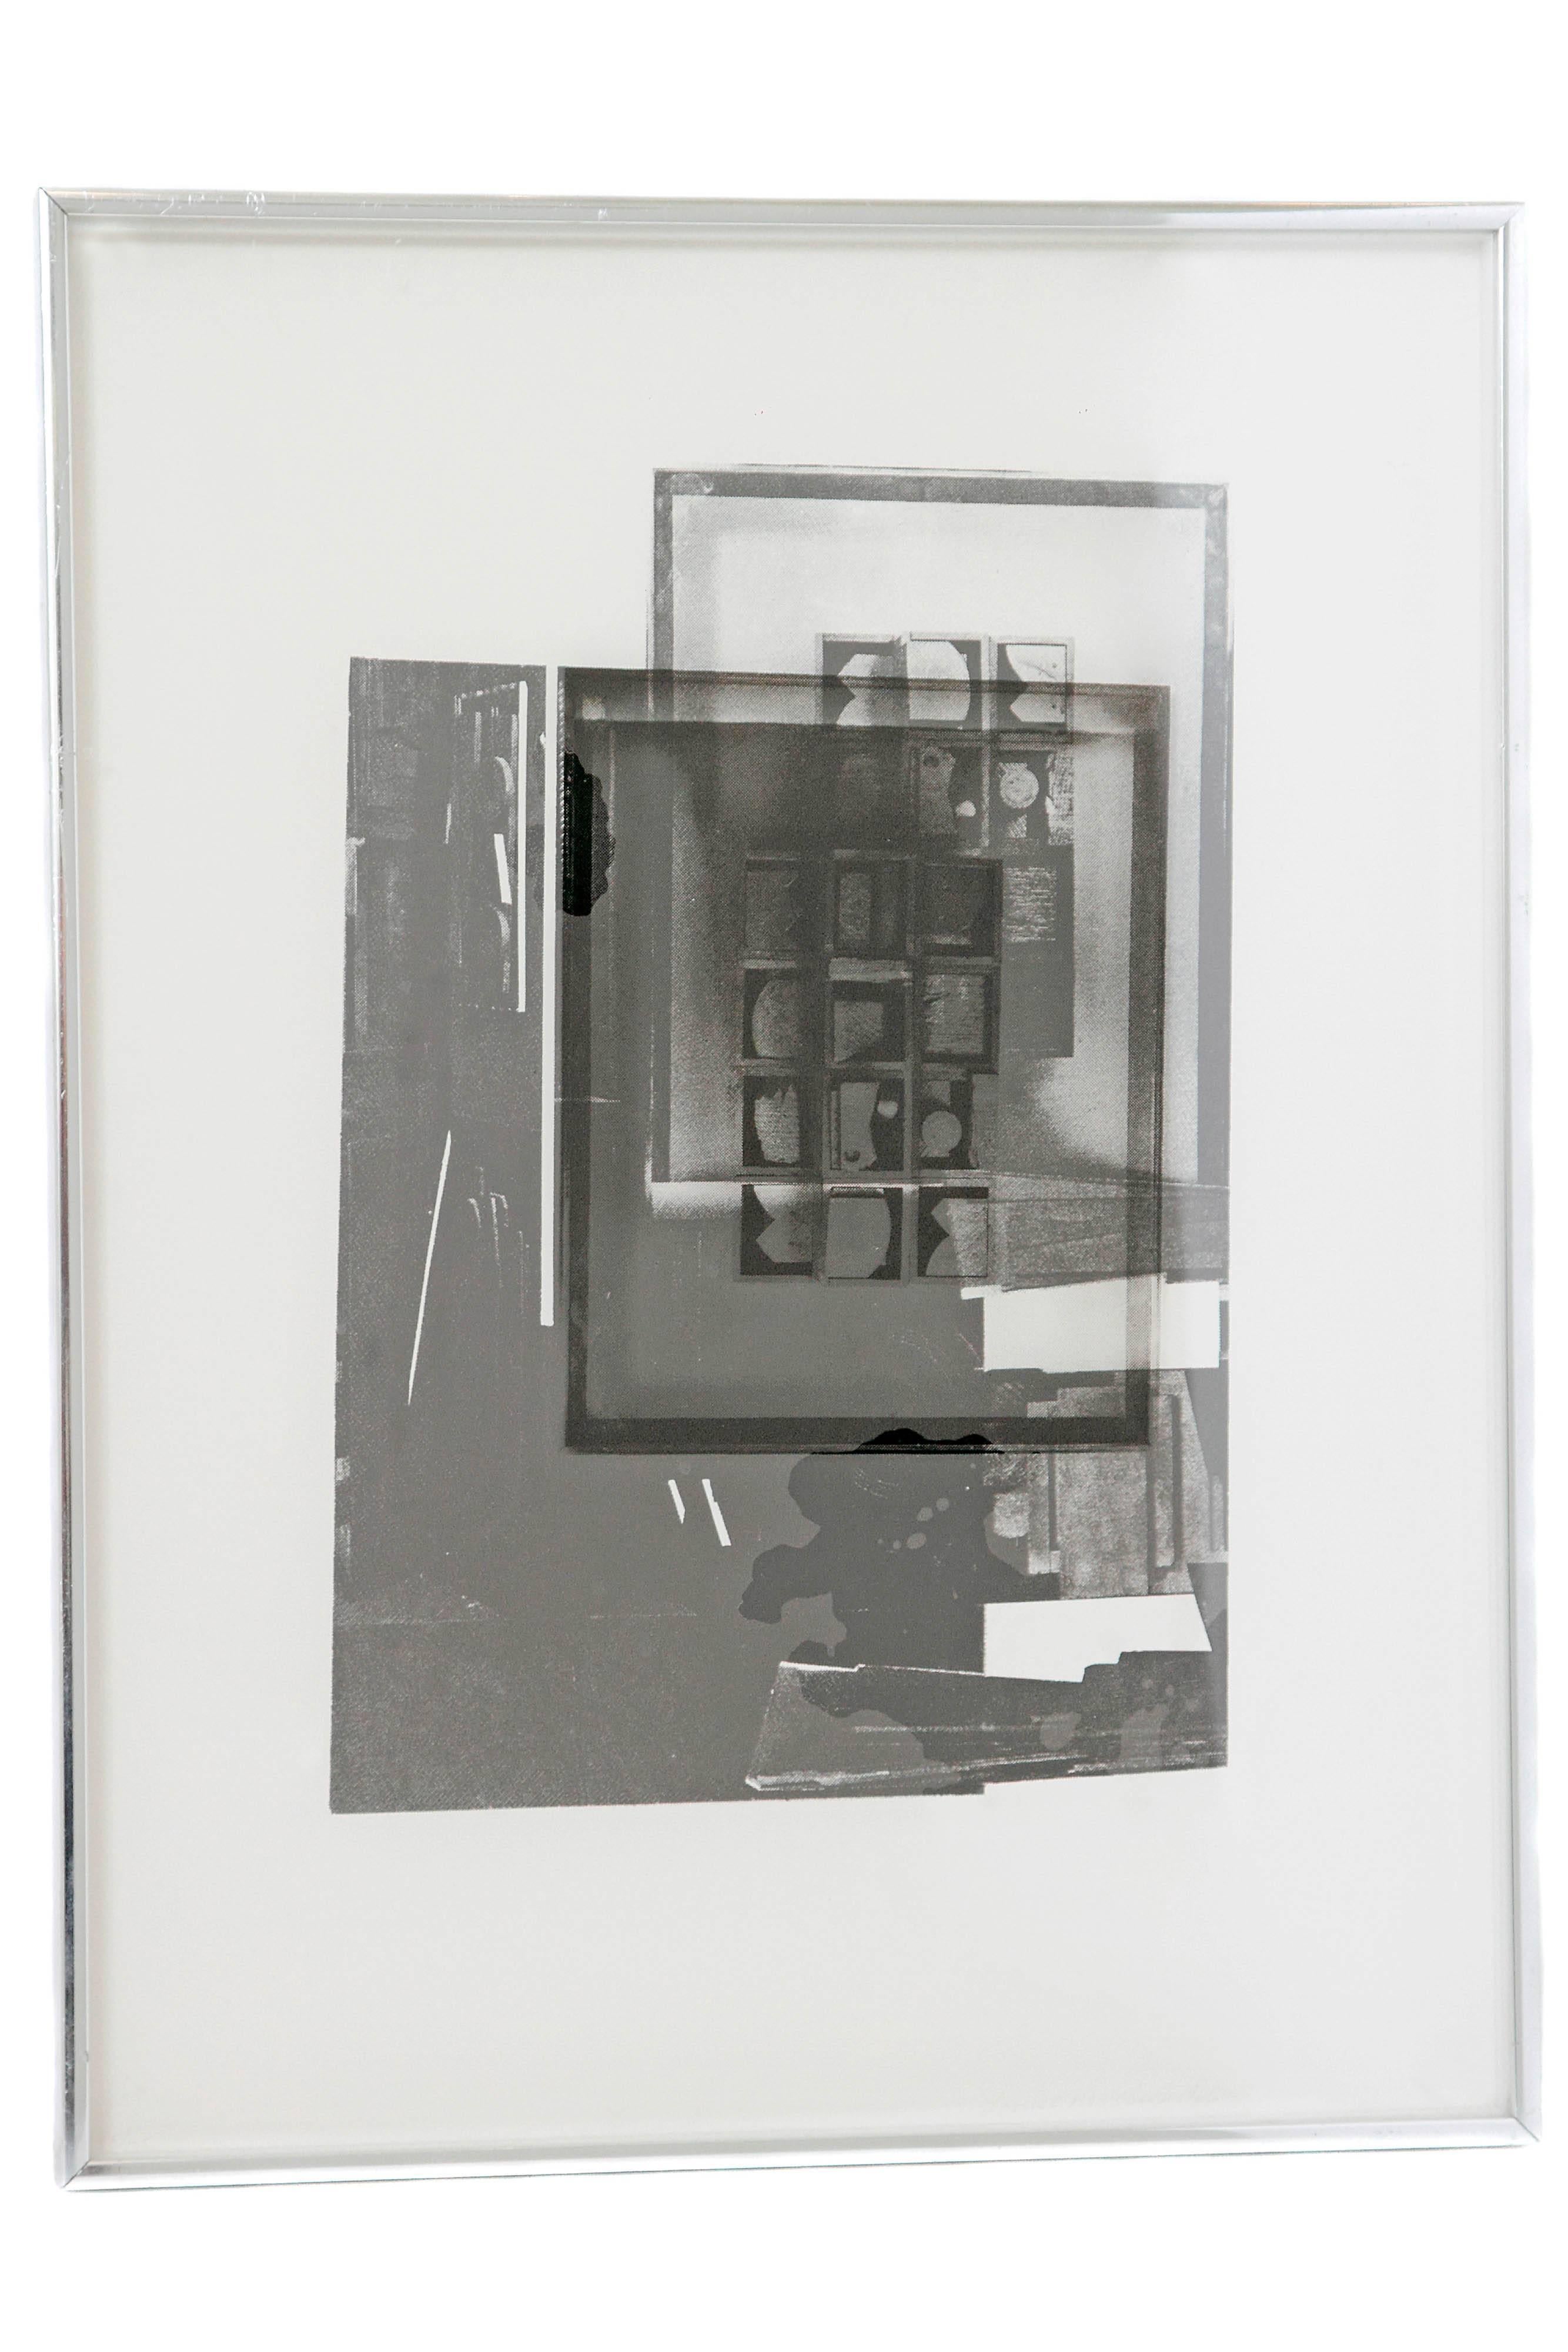 Louise Nevelson, American, 1899-1988.

Four prints from the Facades portfolio, 1966.

Silkscreens with acetate and collage.

Each in a silver toned frame.